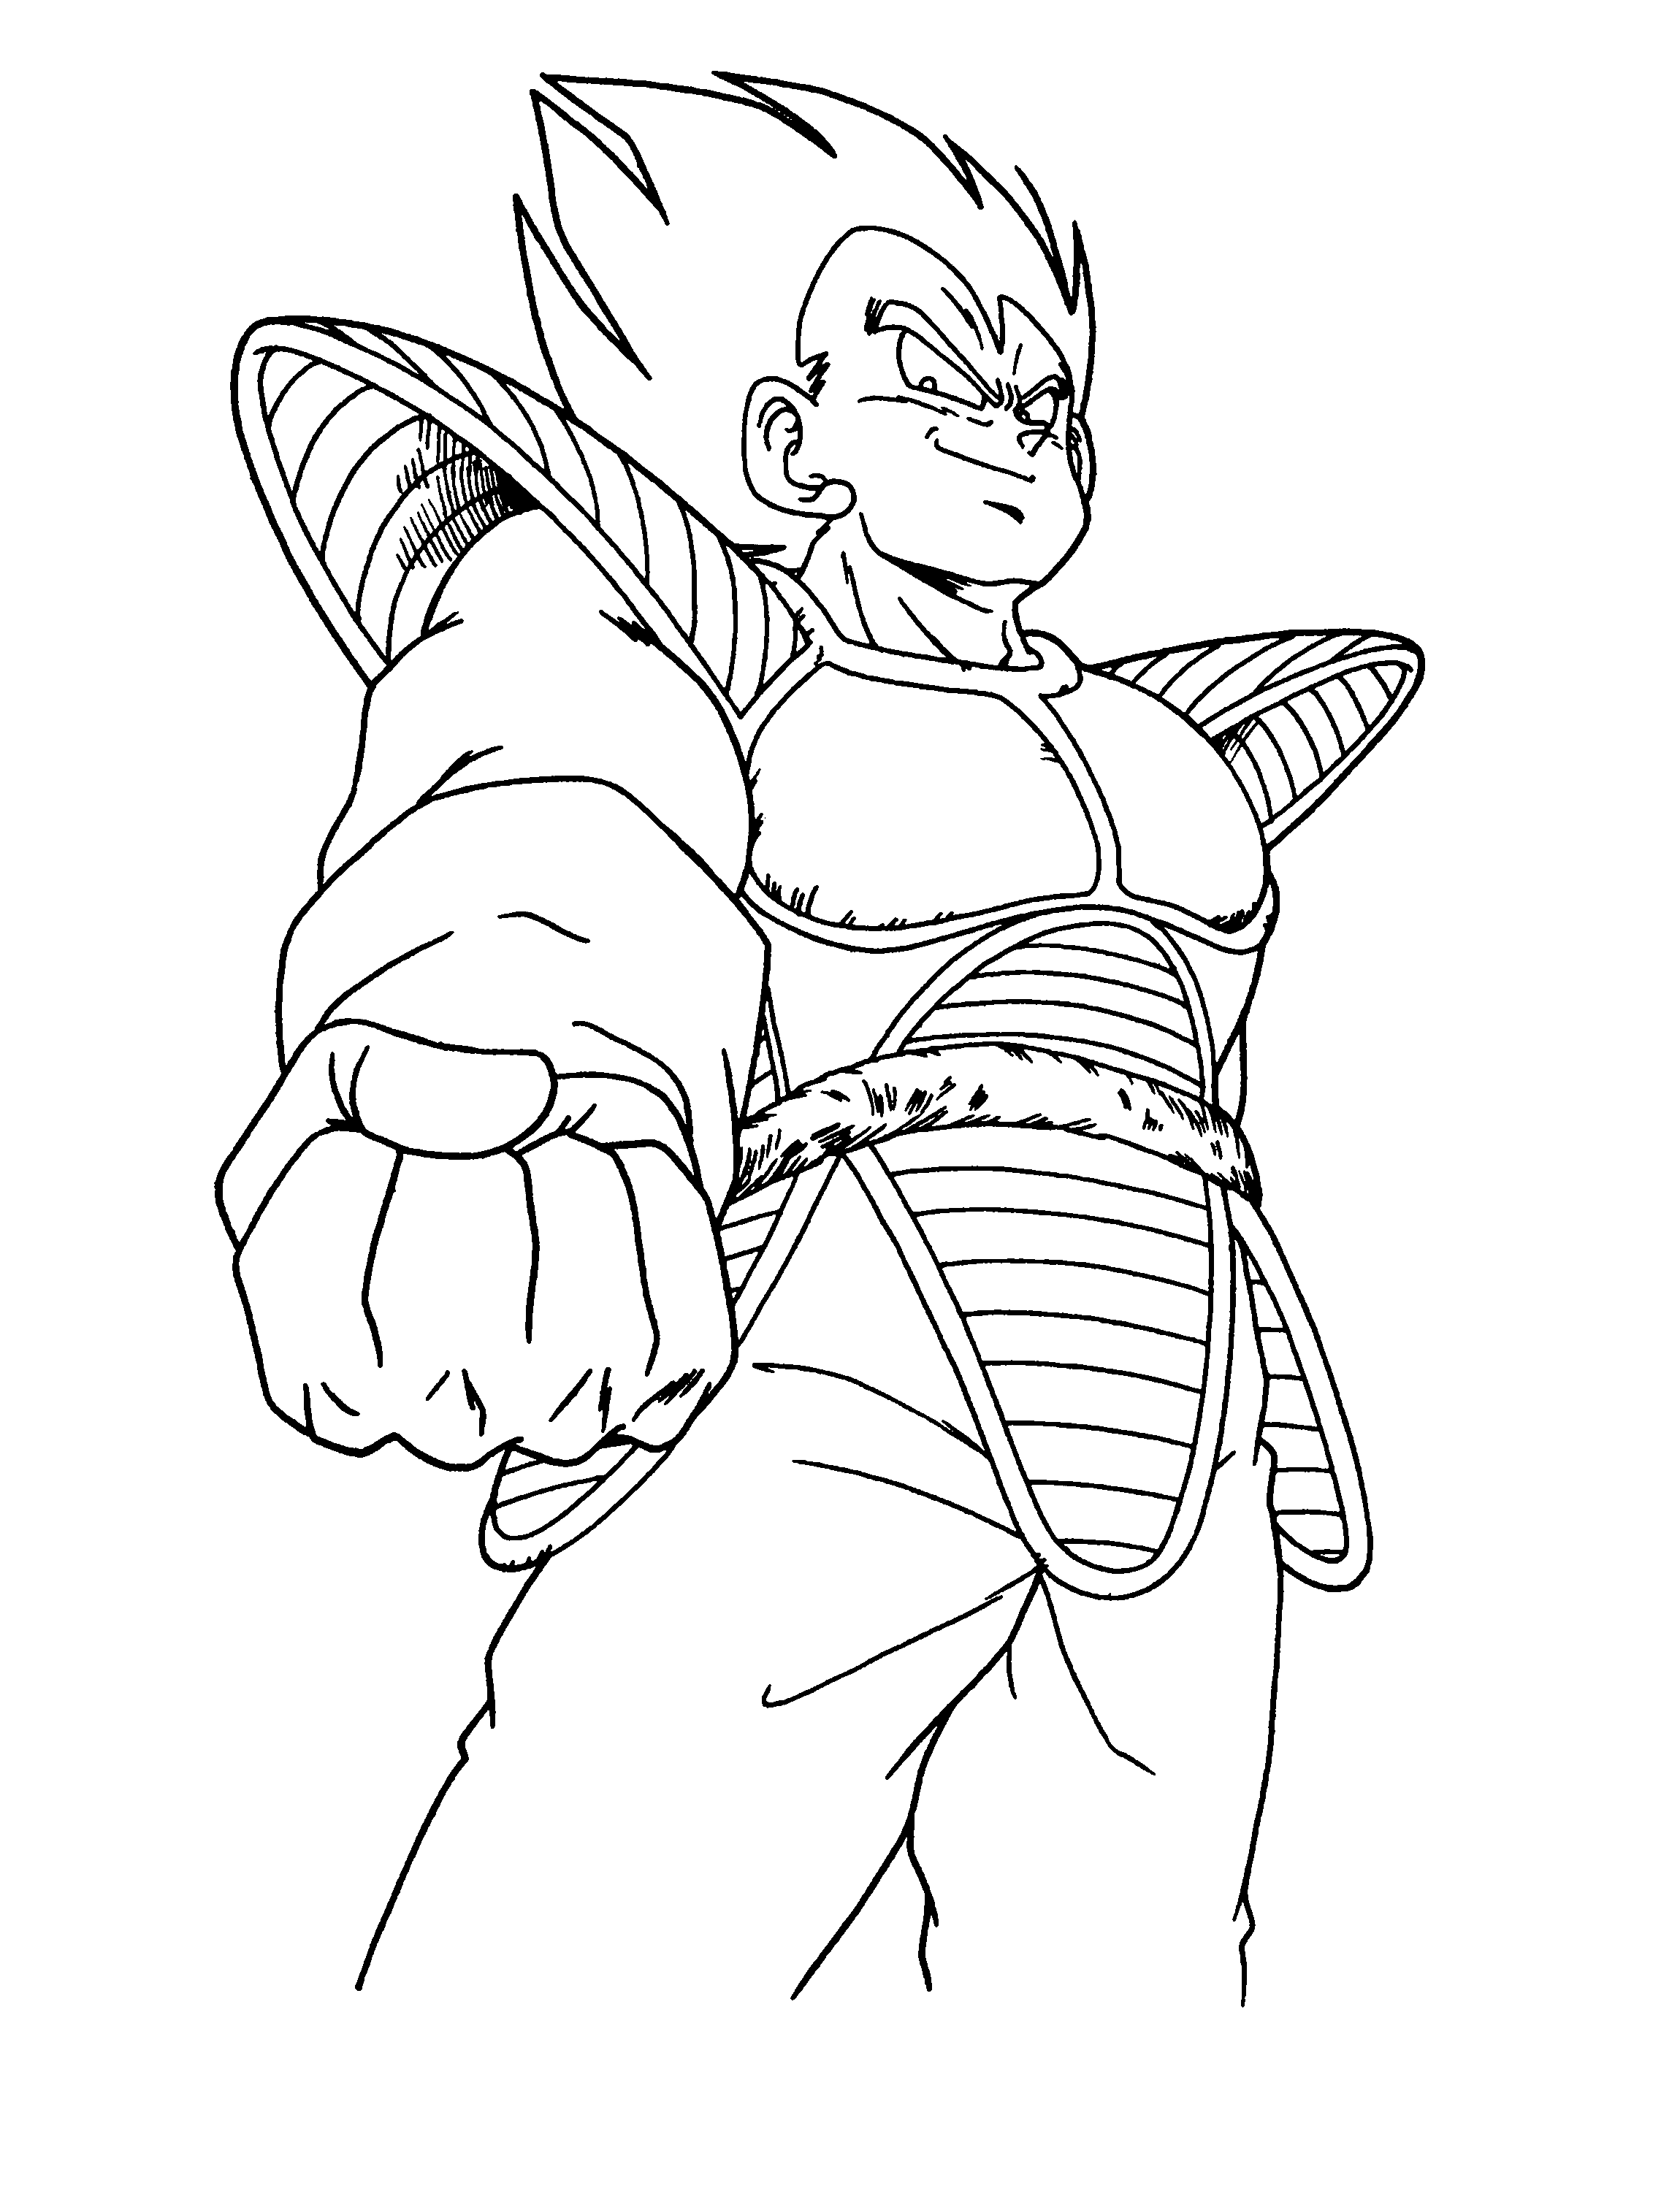 dbz colouring pages coloring pages fun dragon ball coloring pages dbz pages colouring 